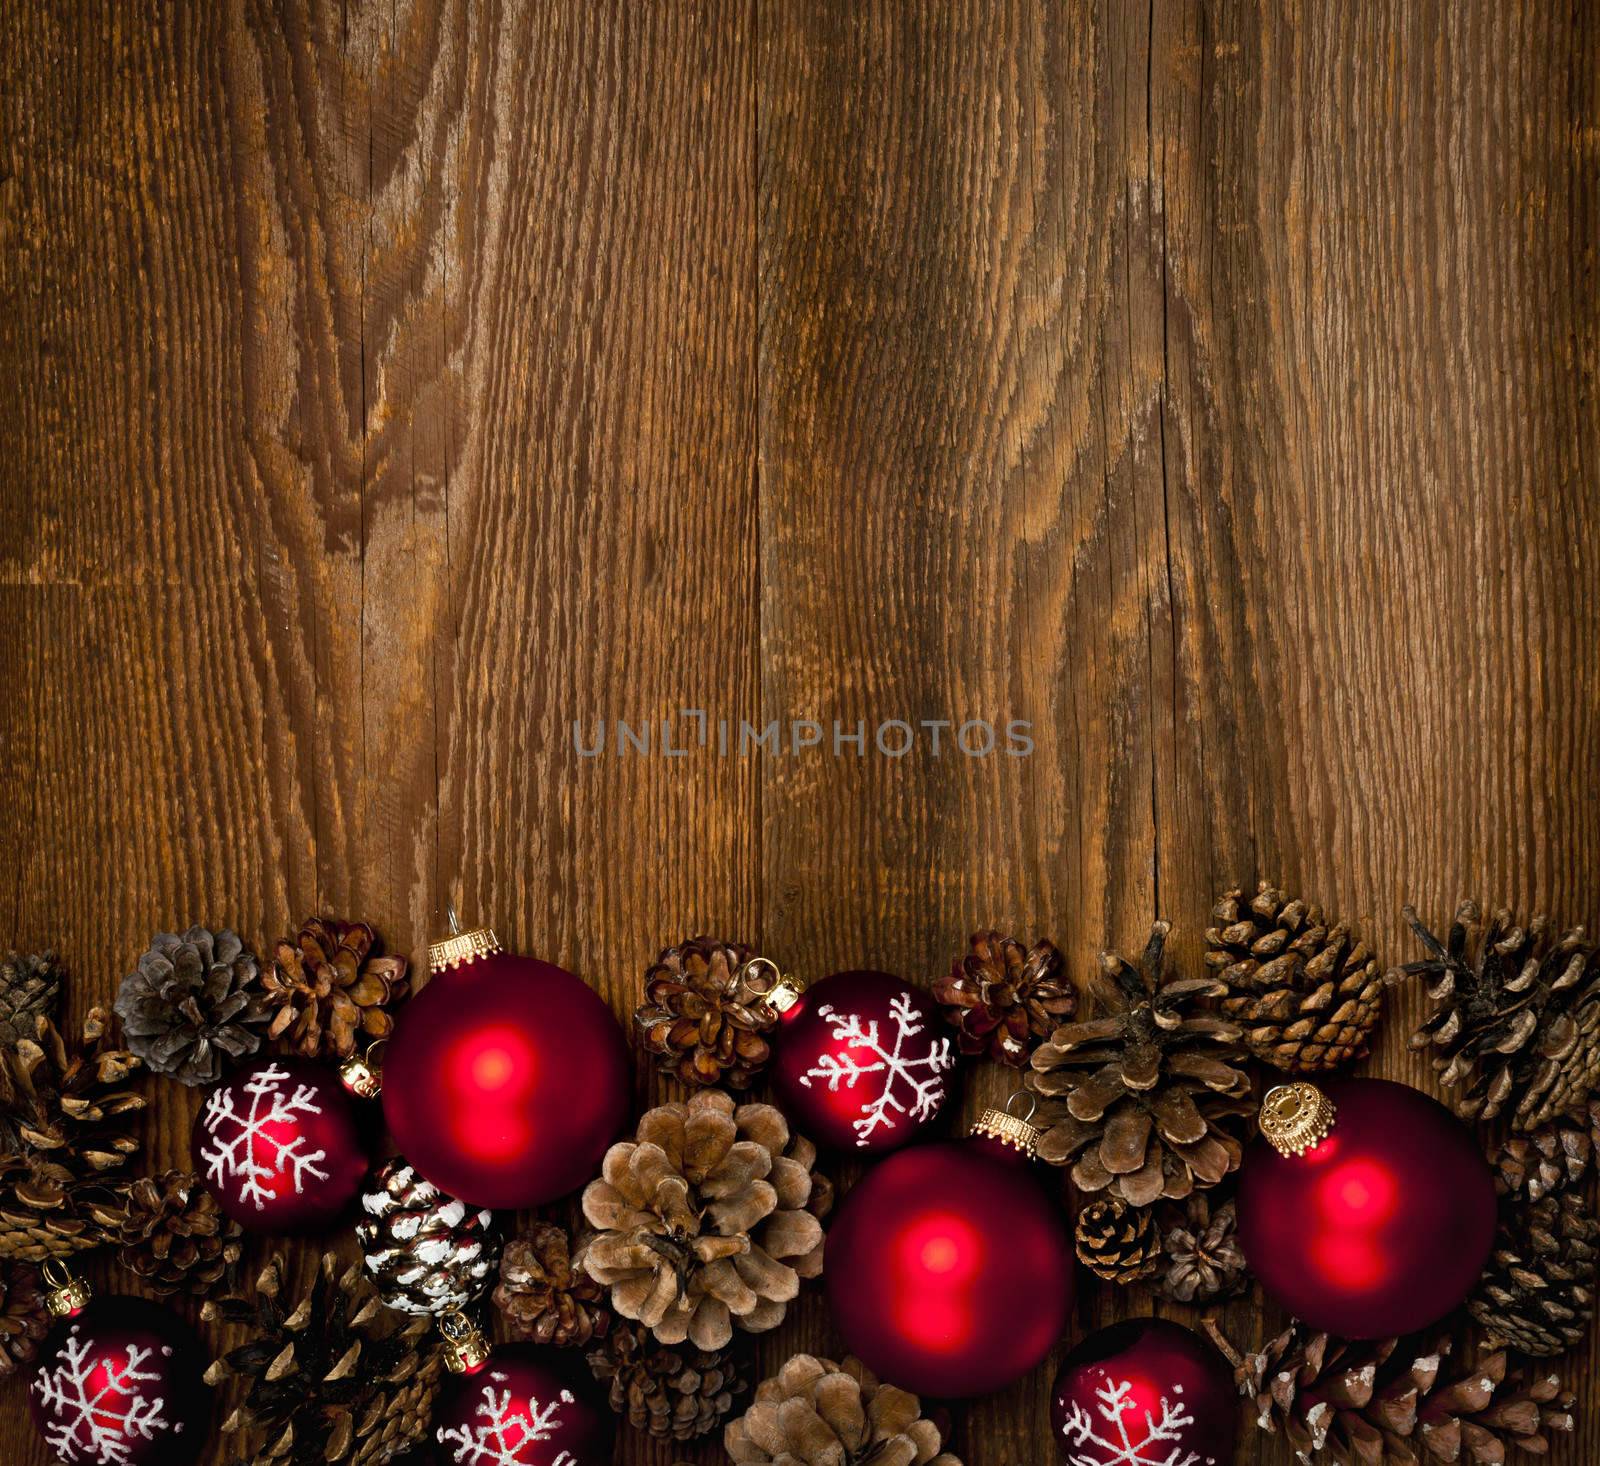 Wood background with Christmas ornaments by elenathewise